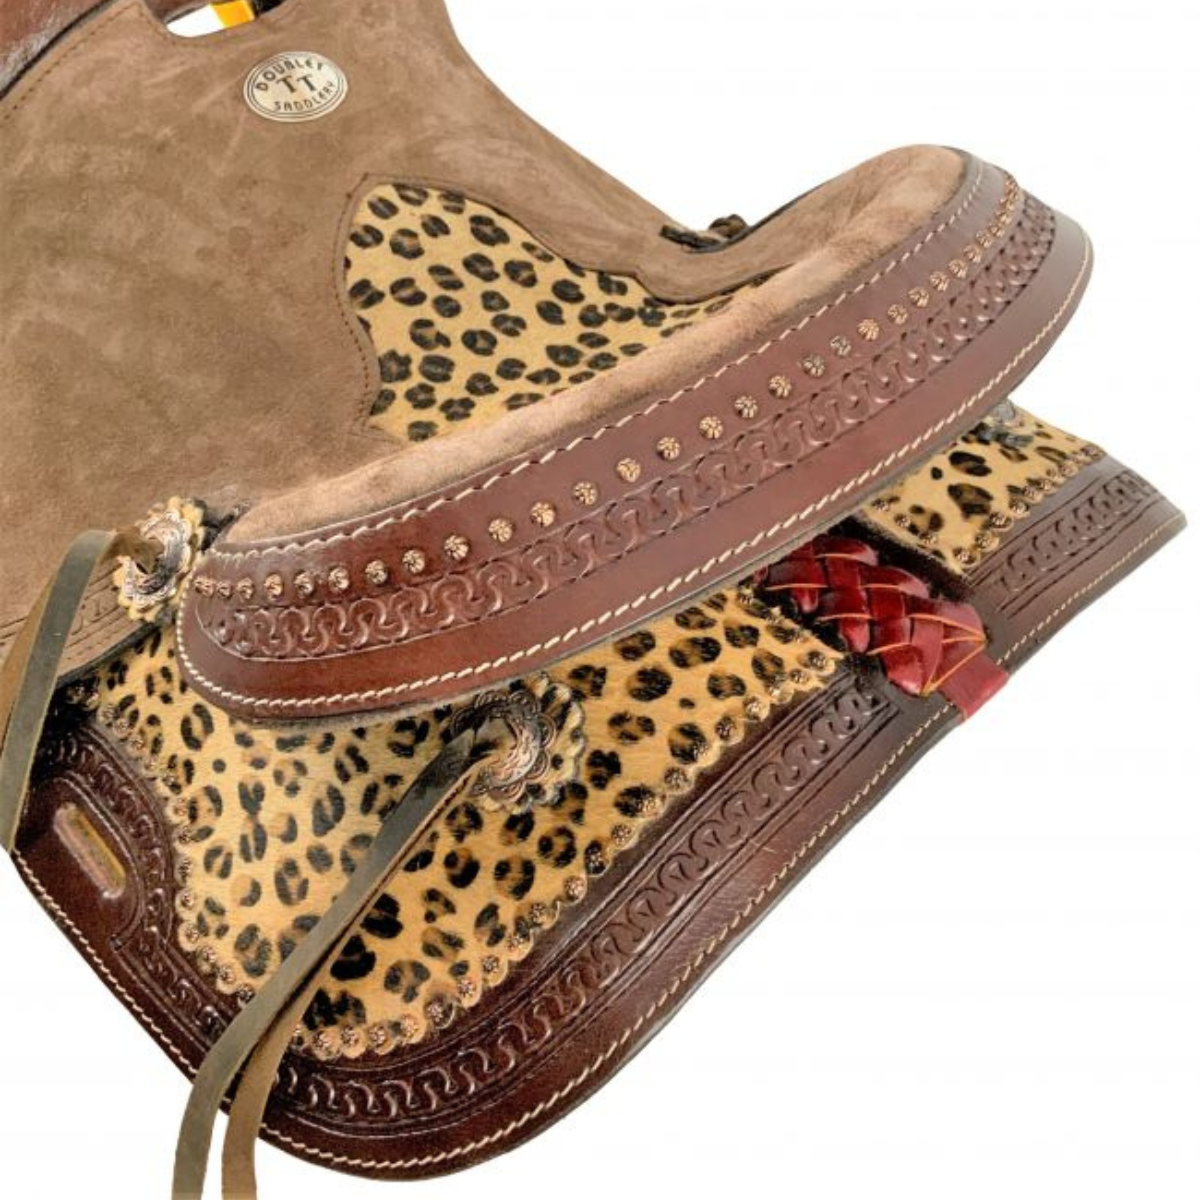 12" DOUBLE T BARREL SADDLE WITH CHEETAH SEAT - Double T Saddles